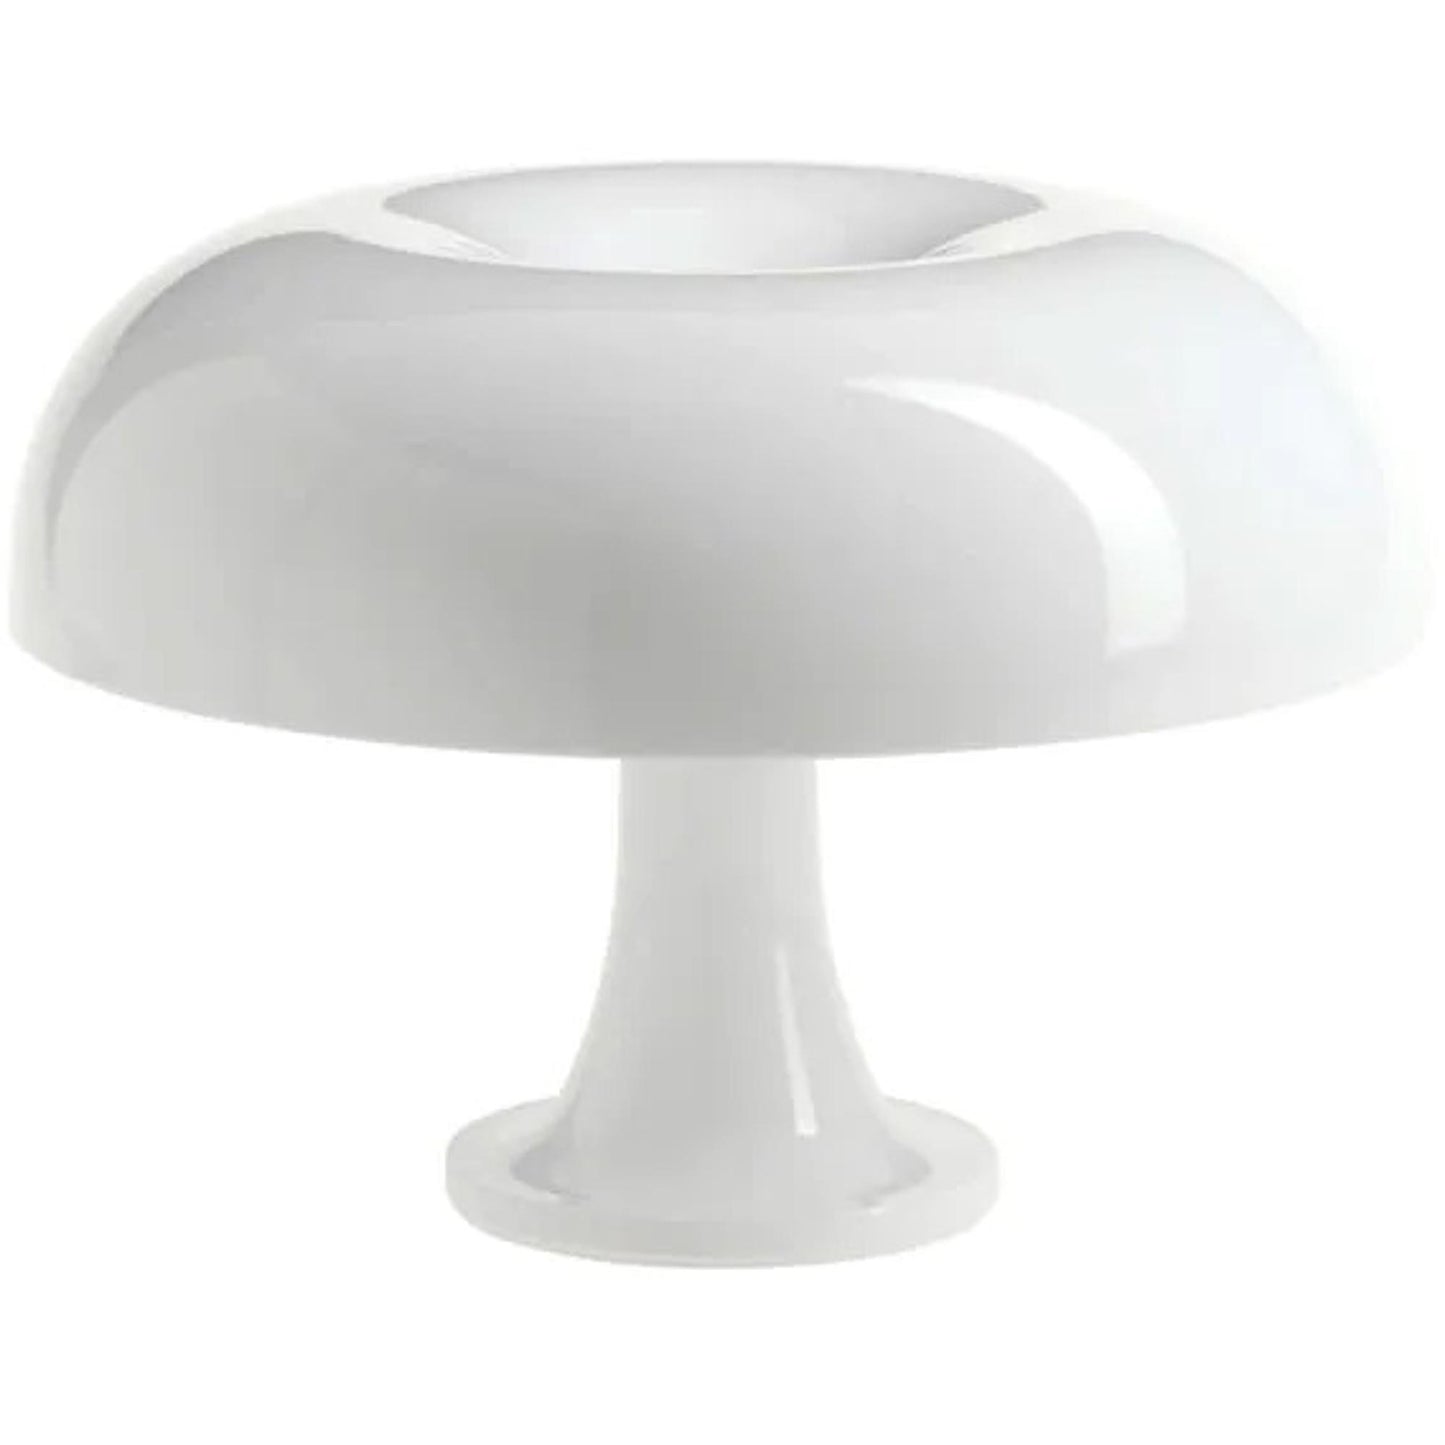 Nessino Table Lamp by Artemide #White